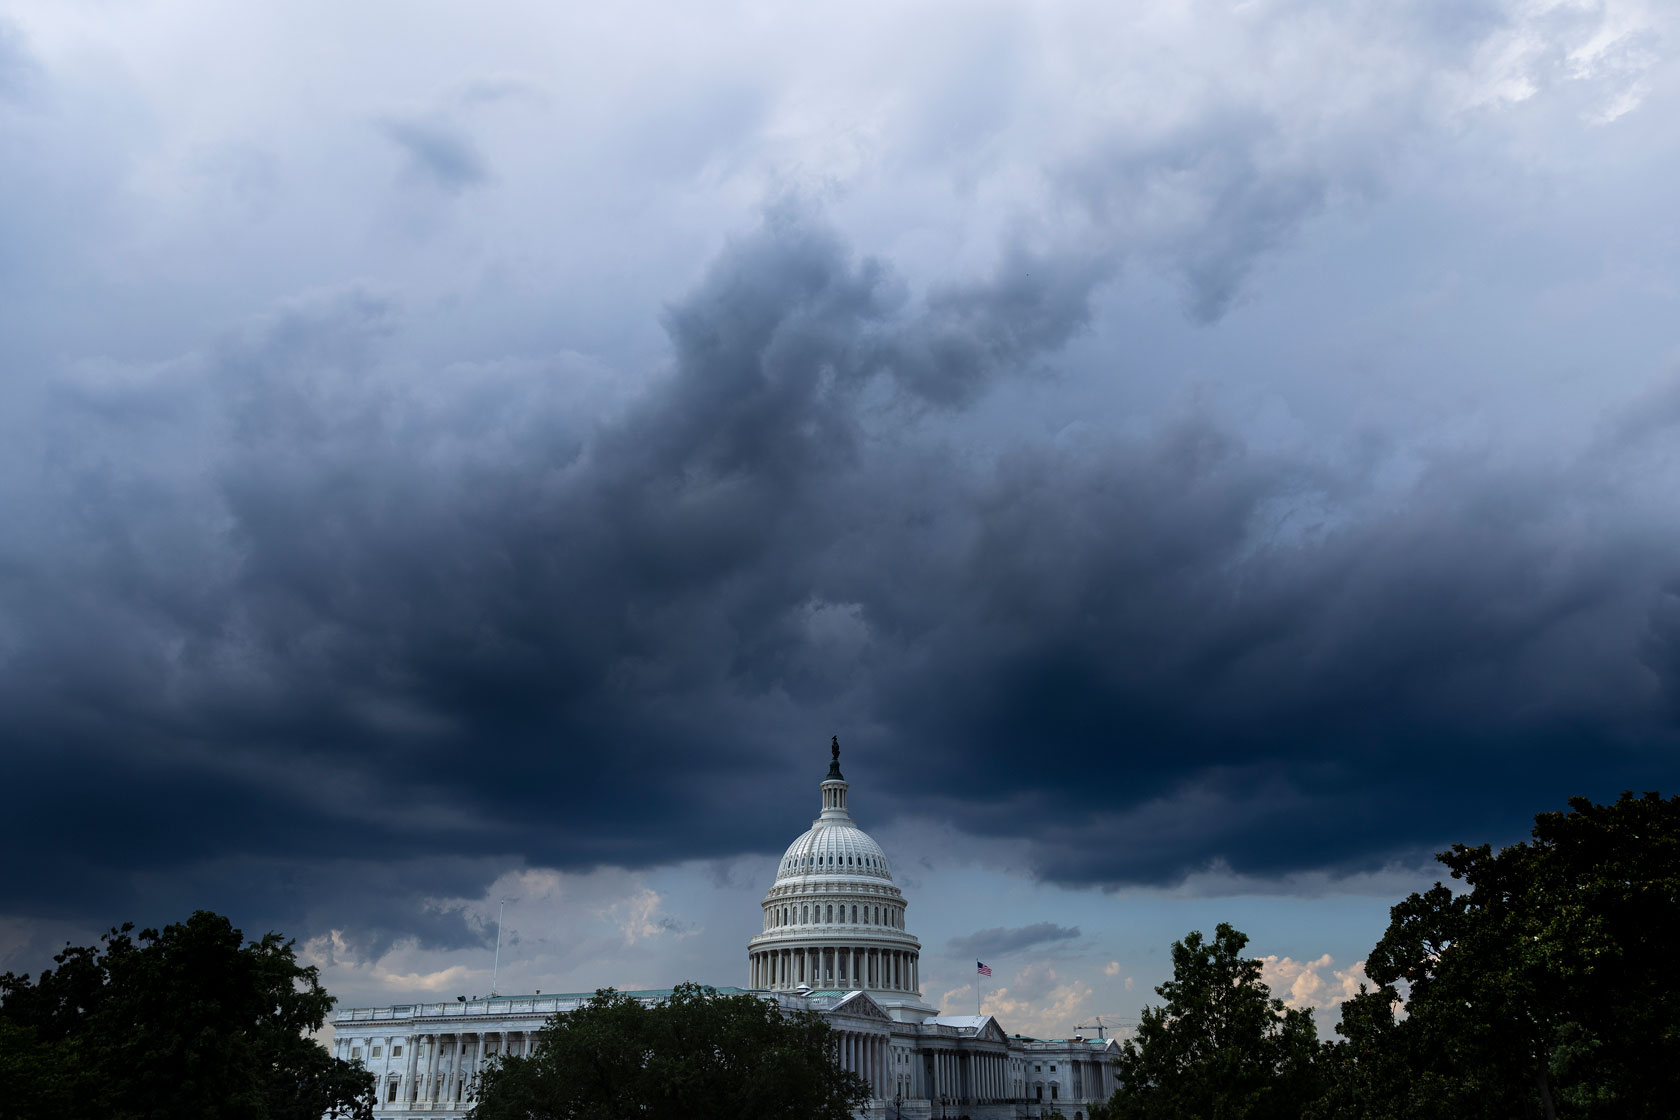 Photo shows the U.S. Capitol building against a dark, stormy sky